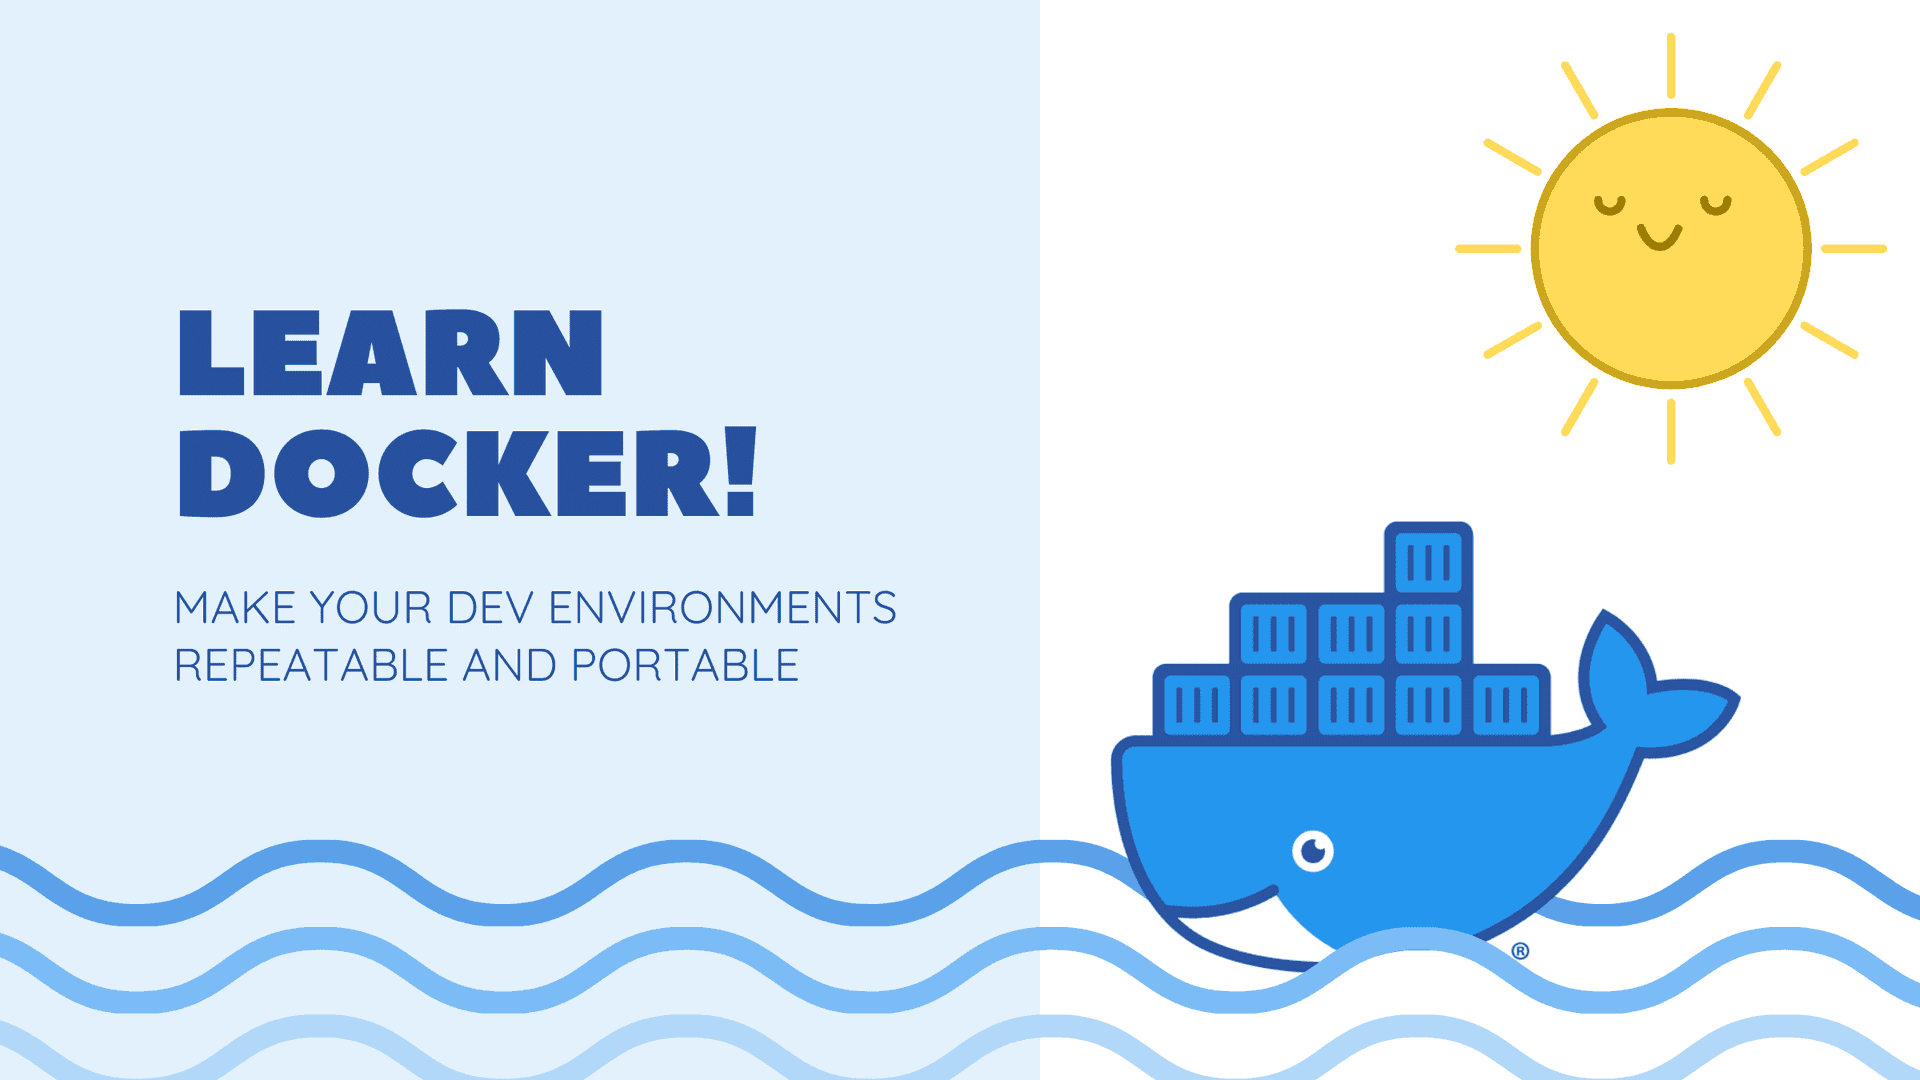 Learn Docker 🐳 for more consistent and portable dev environments! featured image